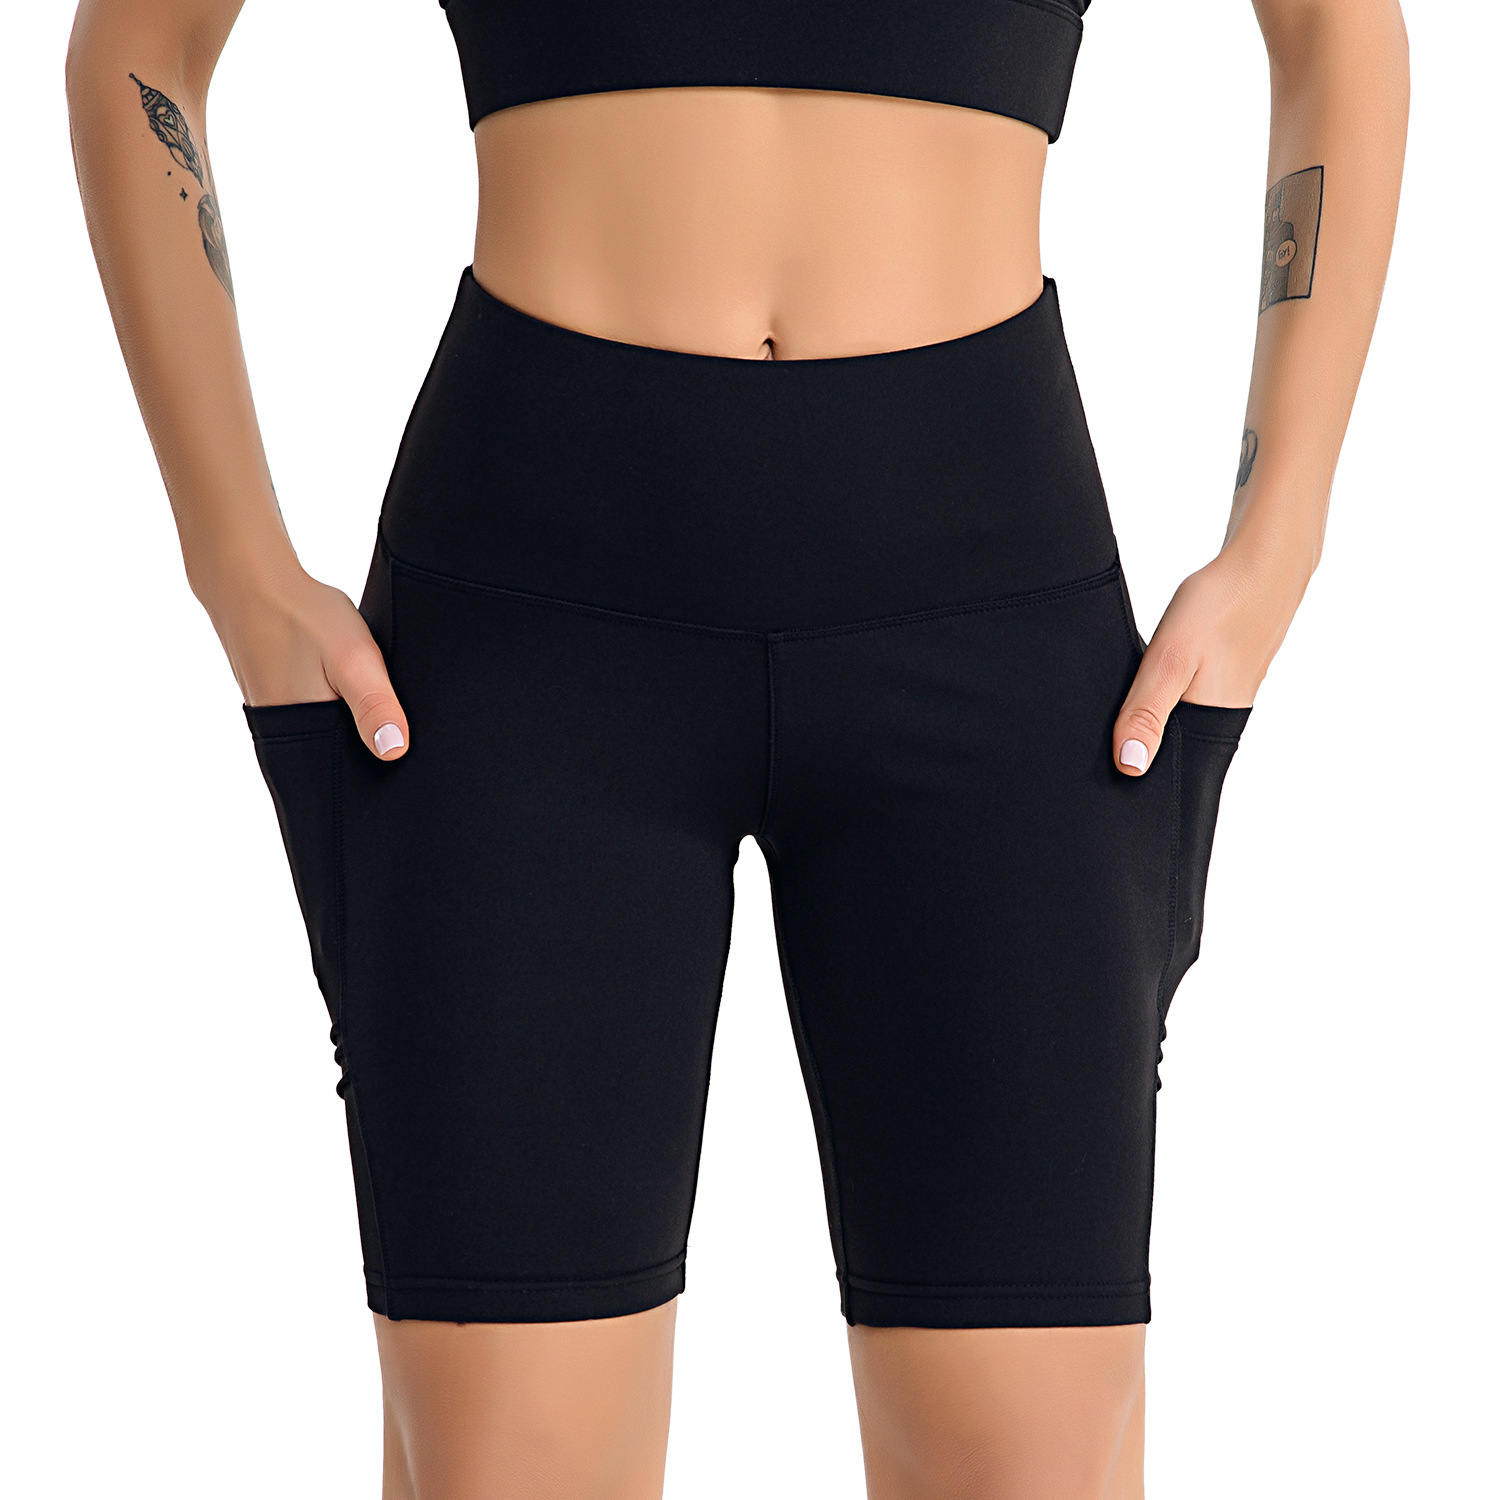 30 Minute Best Workout Shorts For Big Thighs for push your ABS